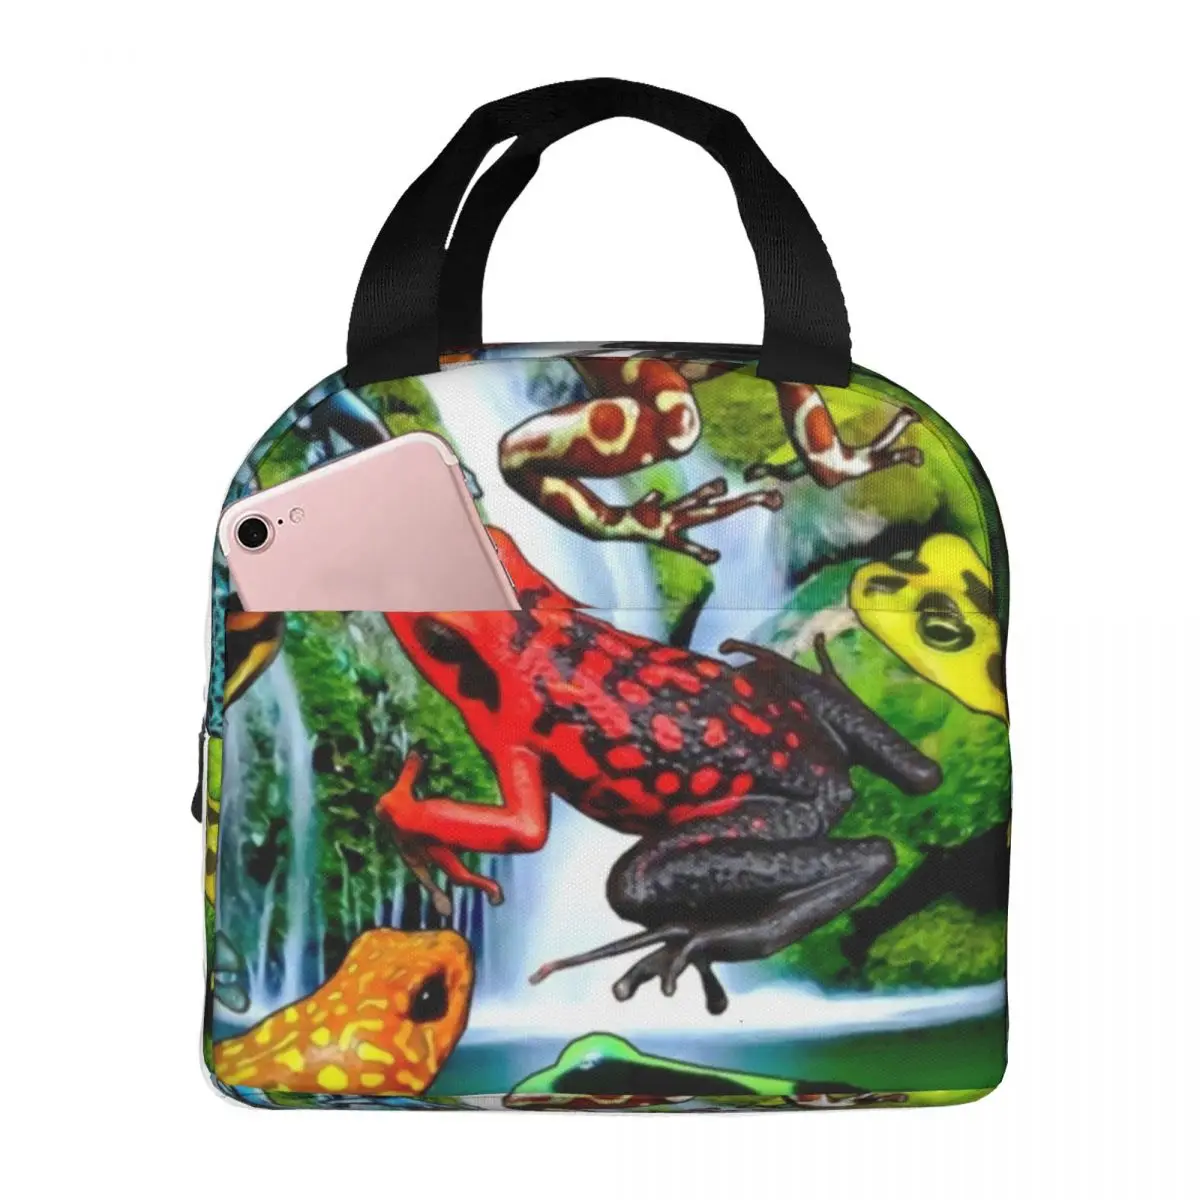 

Rainforest Frog Lunch Bag with Handle Colorful Poison Frogs Cool Cooler Bag Carry Office Meal Thermal Bag